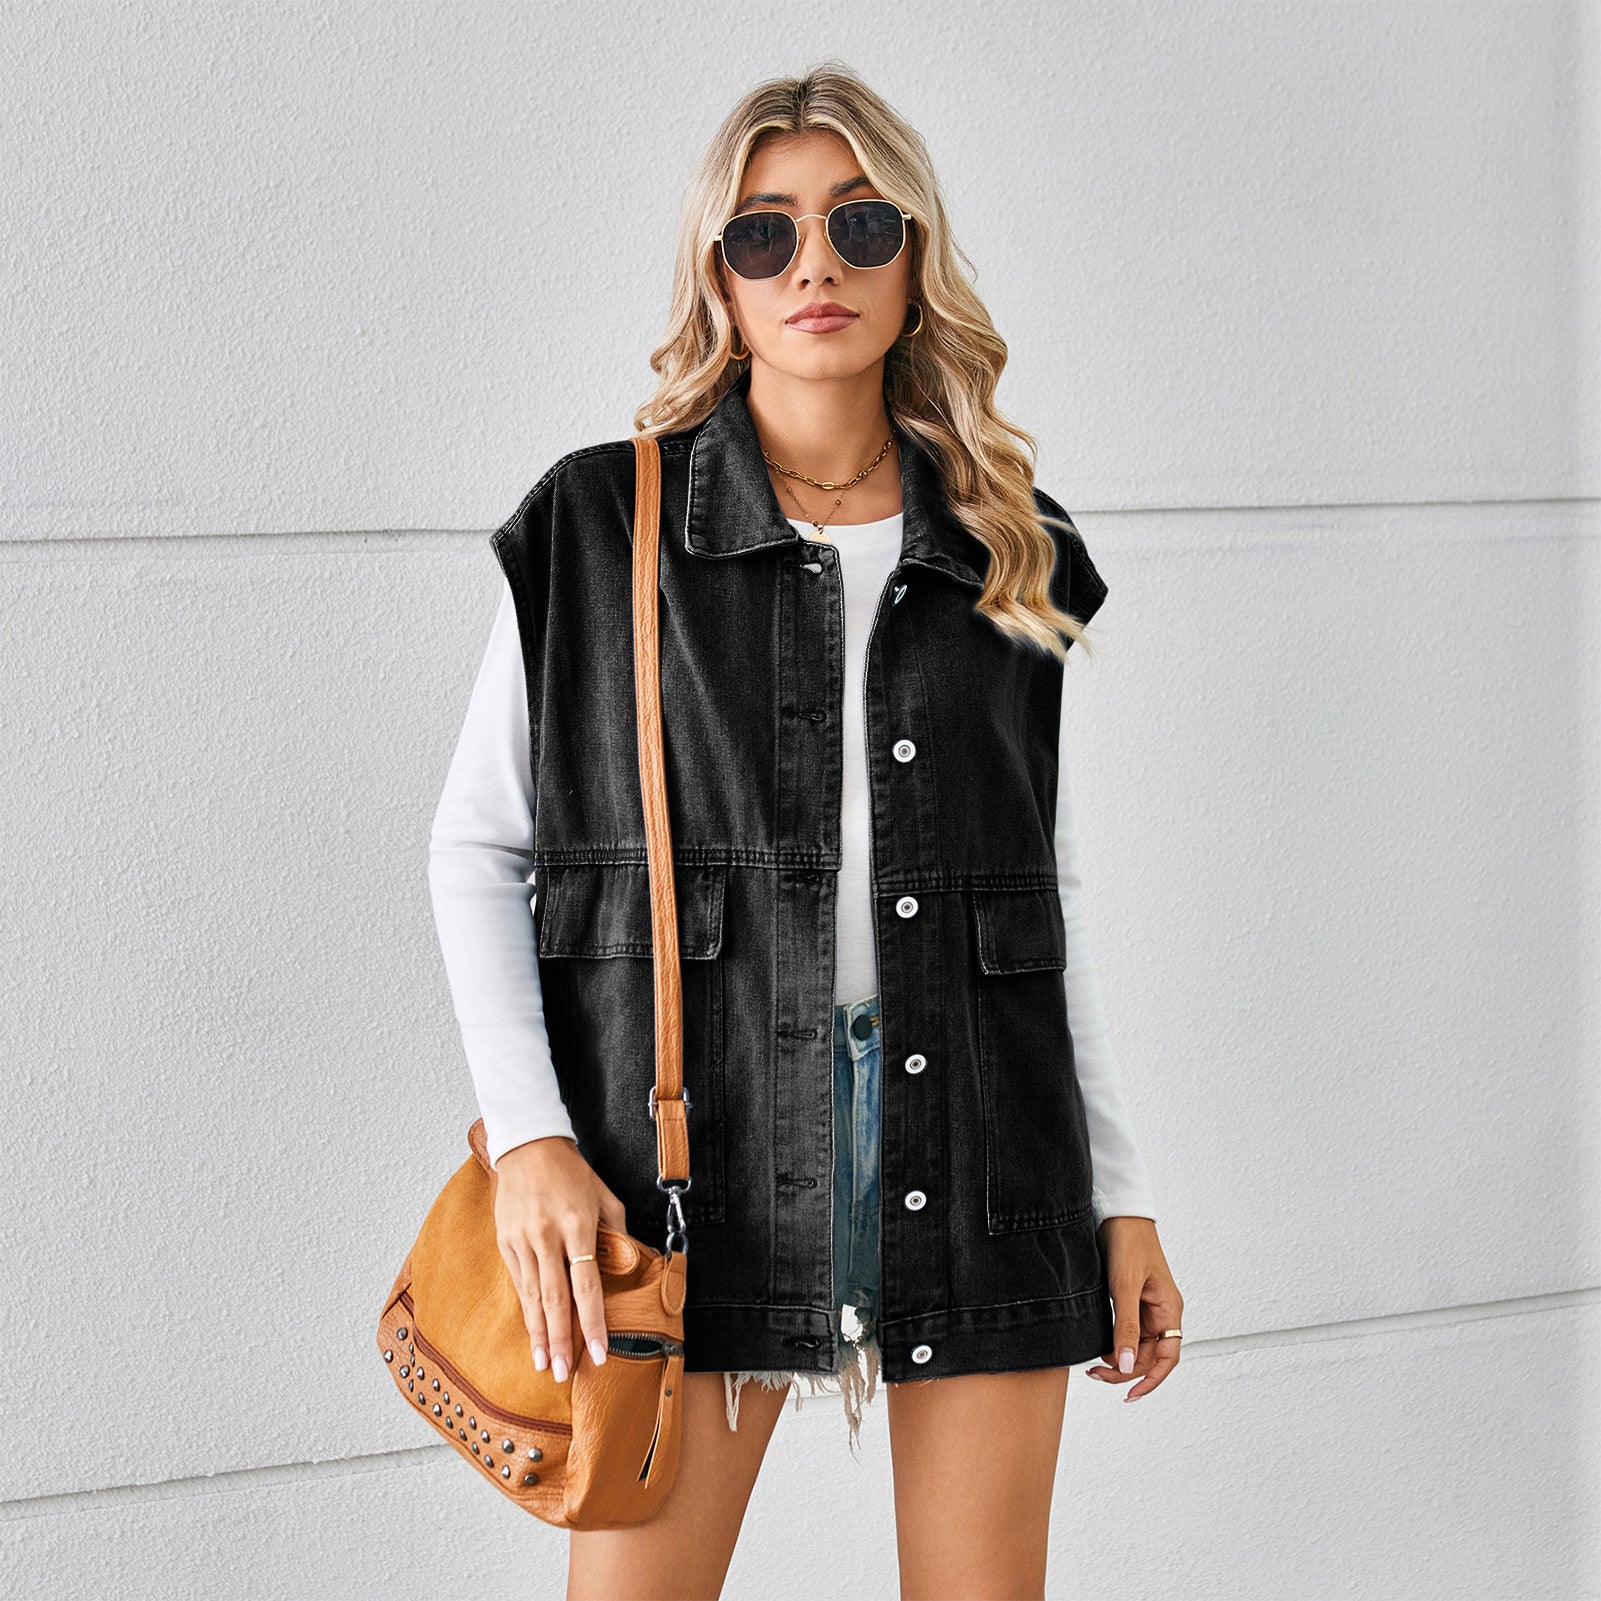 Denim Vest With Big Pockets Fashion Sleeveless Outwear Vest For Womens Clothing